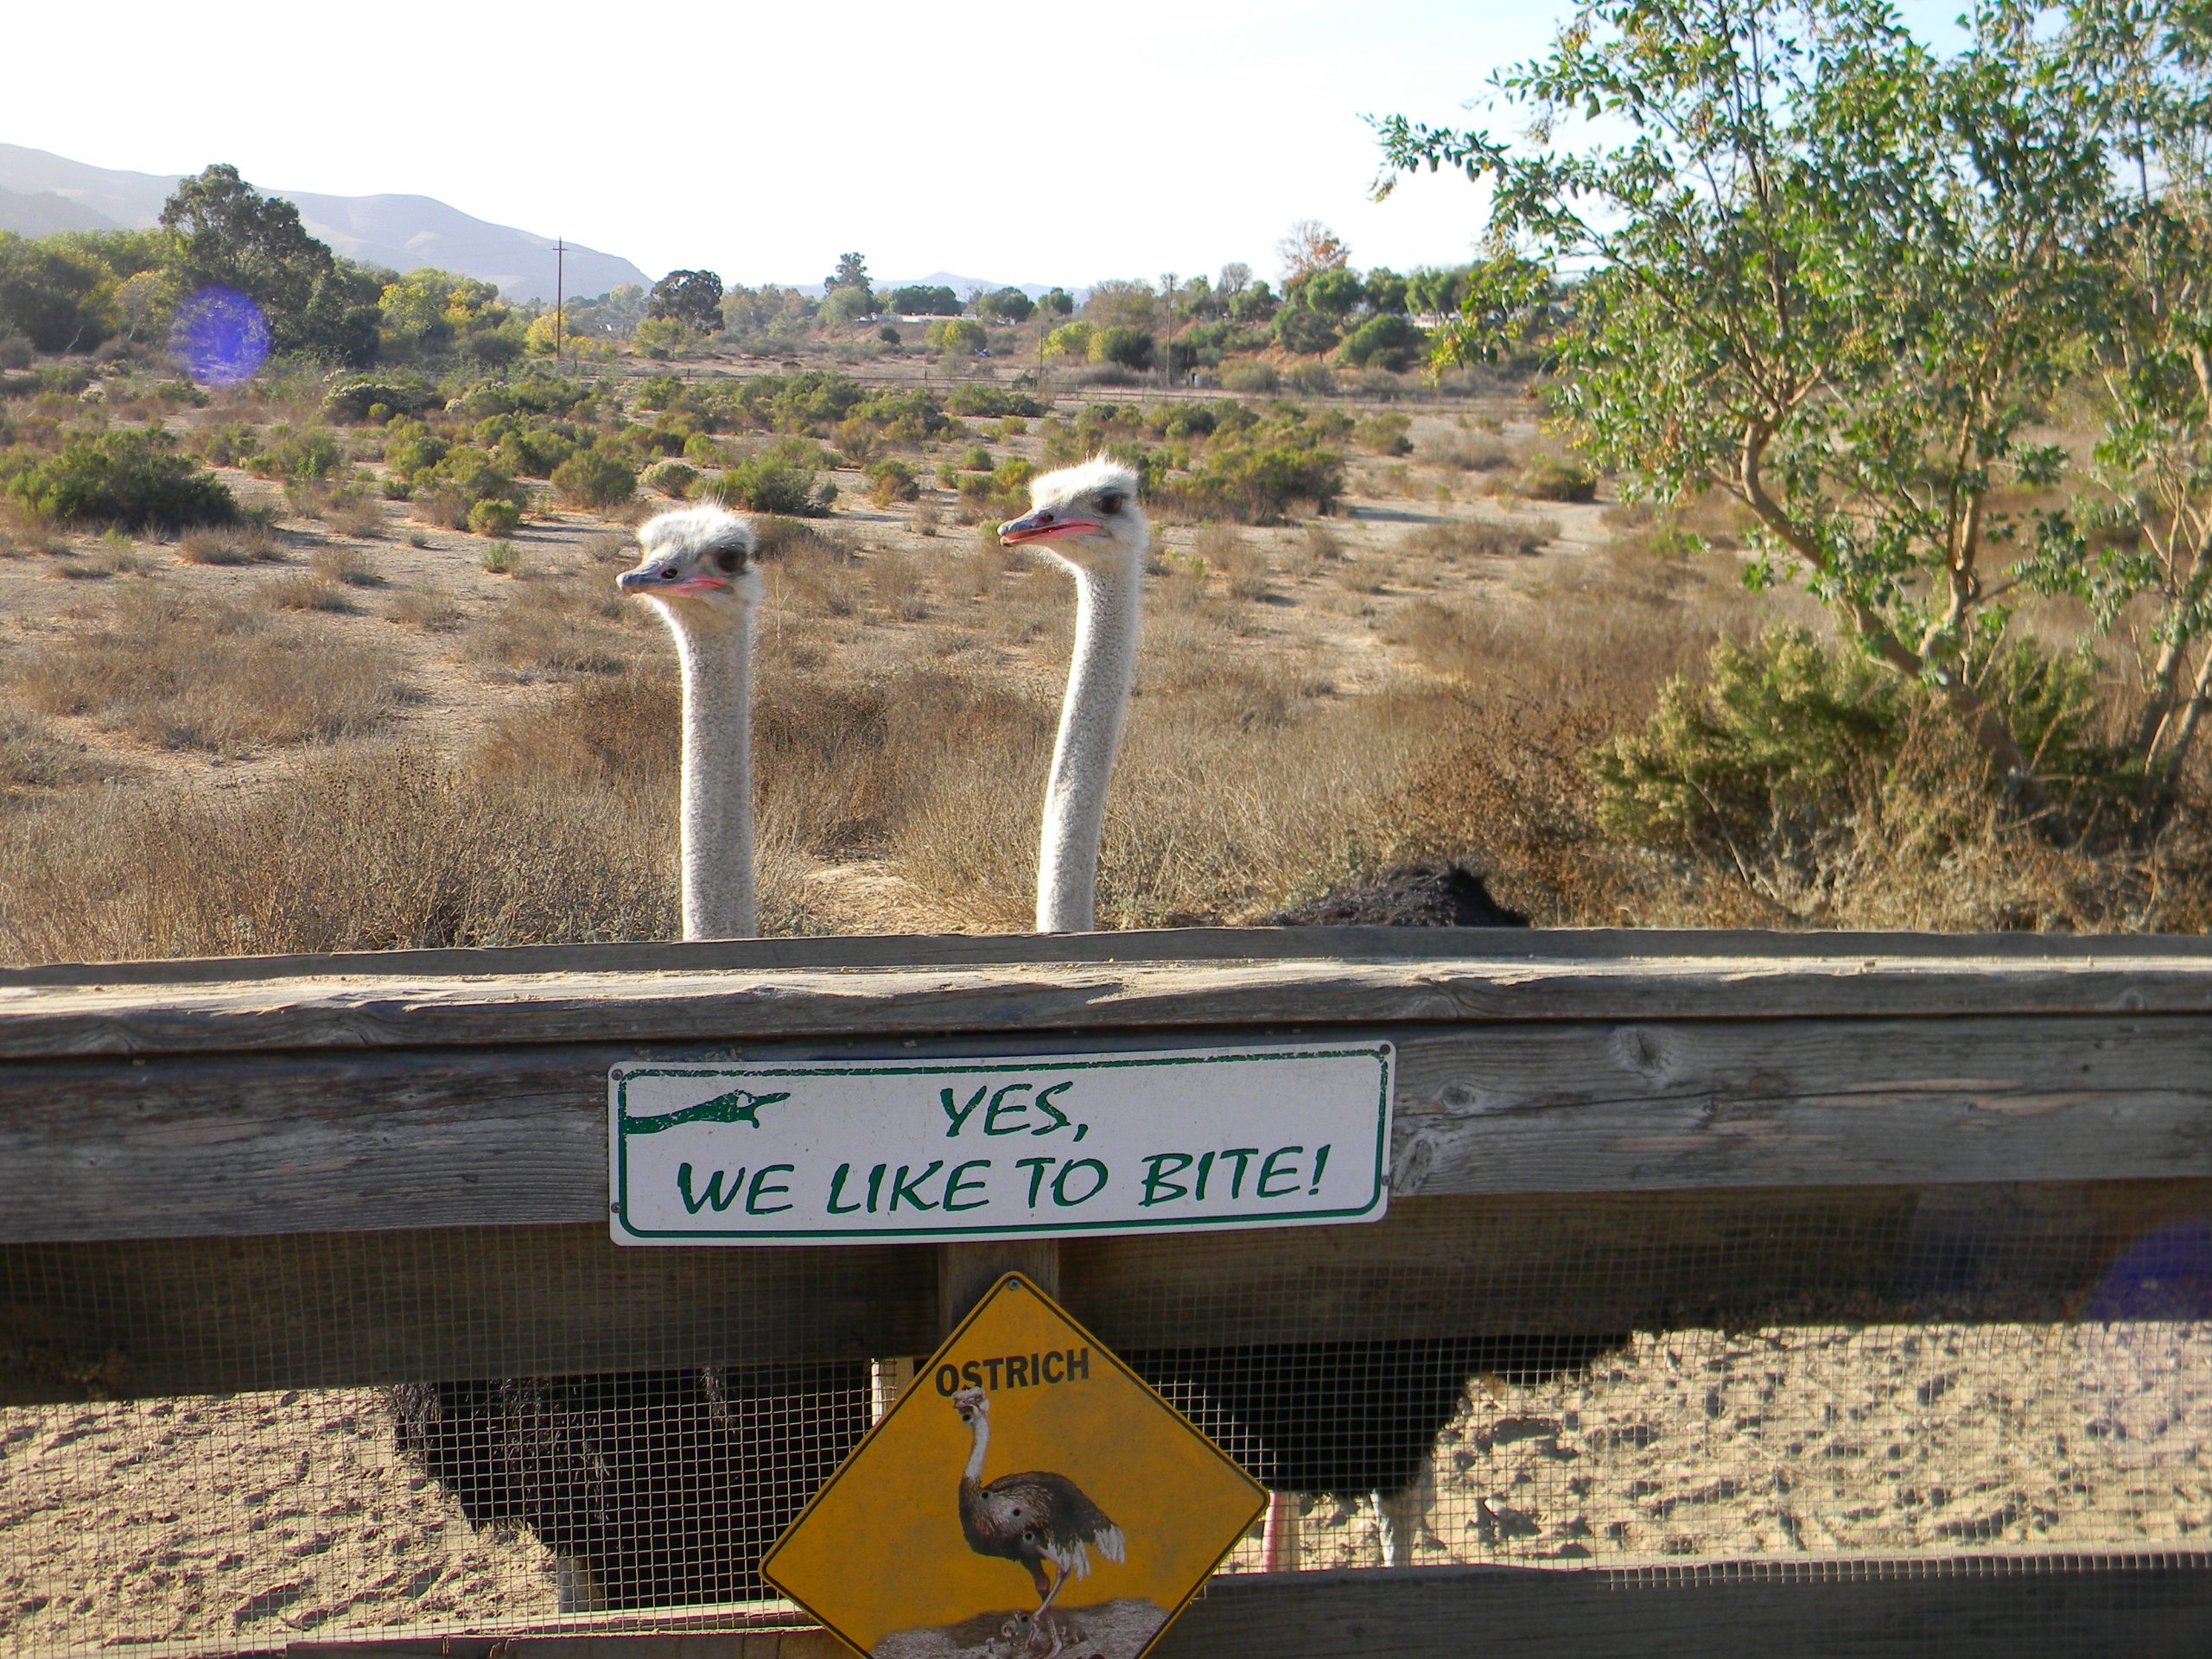 Visit Ostrich Land; A Must See Along the California Coast!